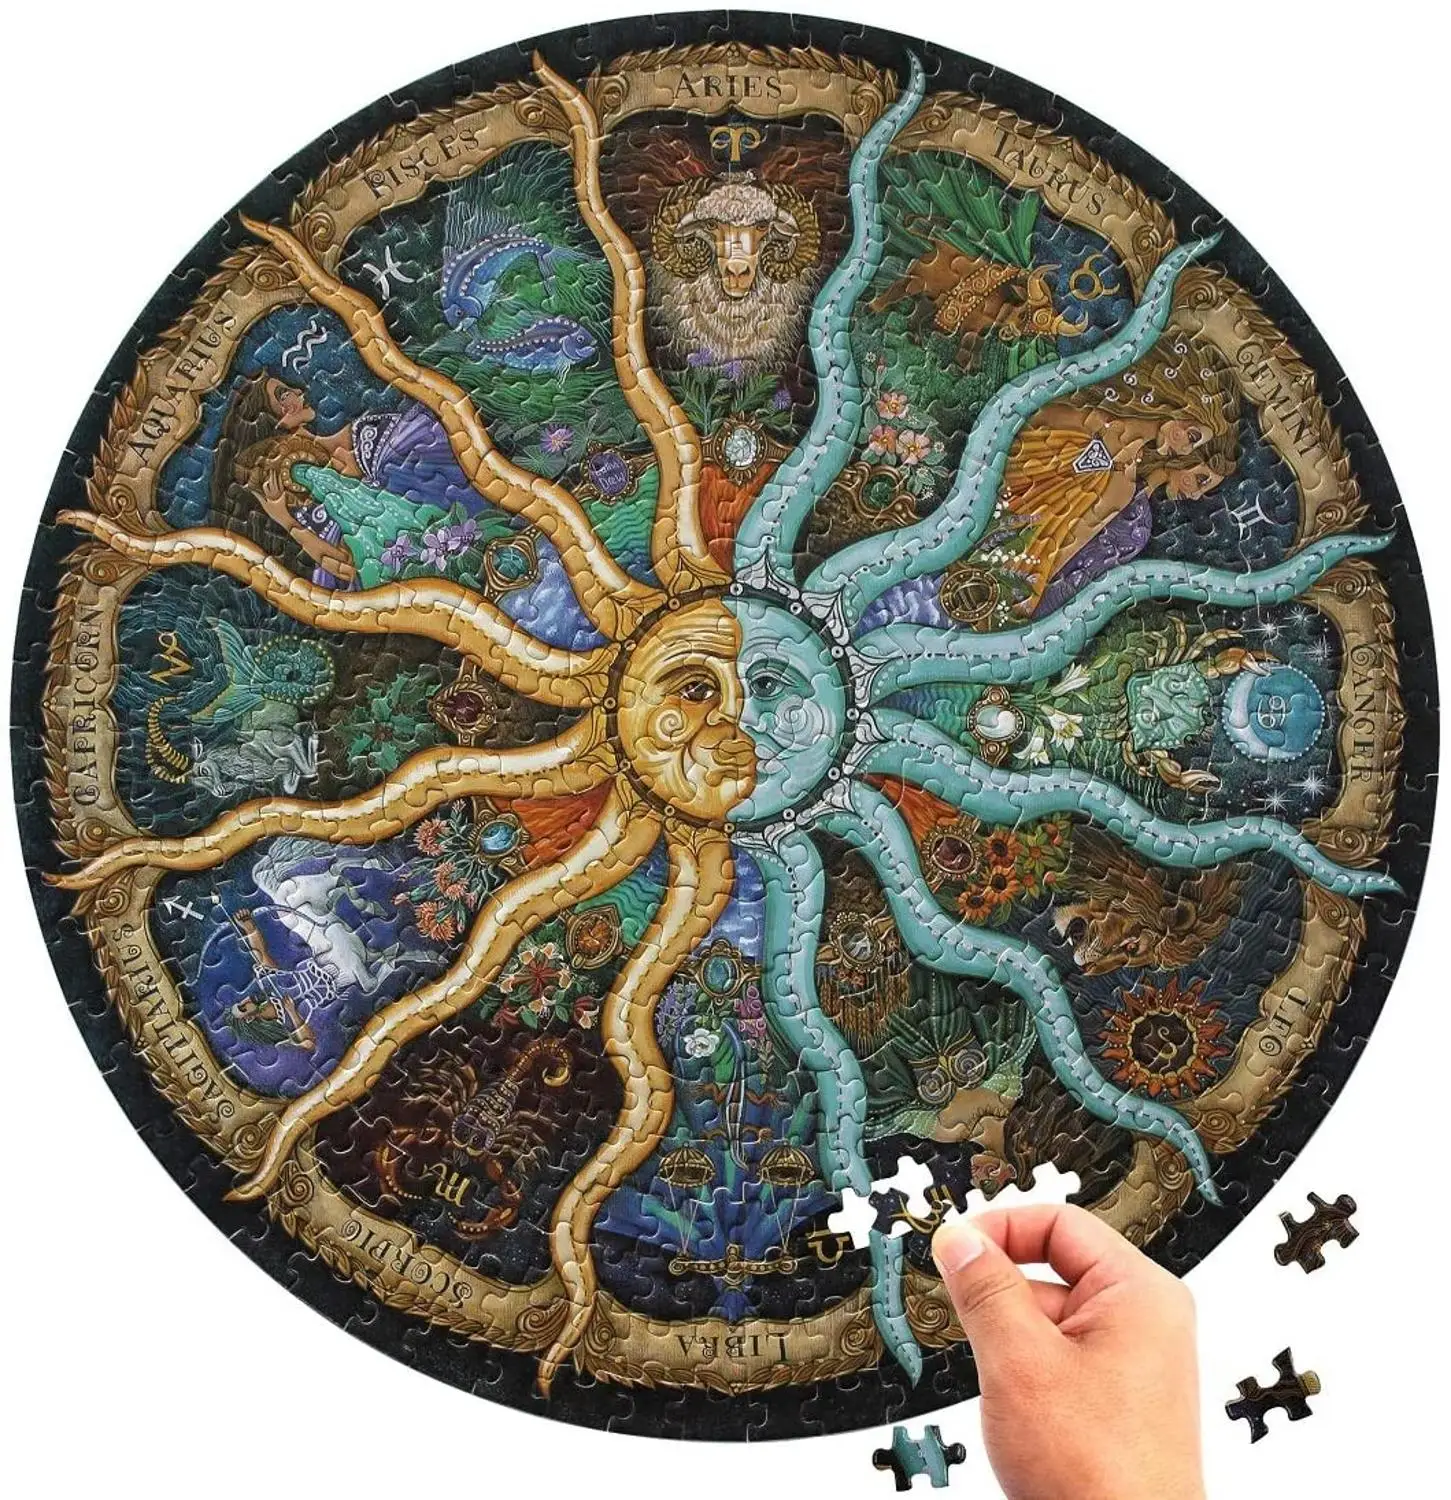 

1000 Pieces Jigsaw Puzzles for Adults Imagination Series- Zodiac Horoscope Puzzle Toys DIY Constellation Puzzles Graduation Gift